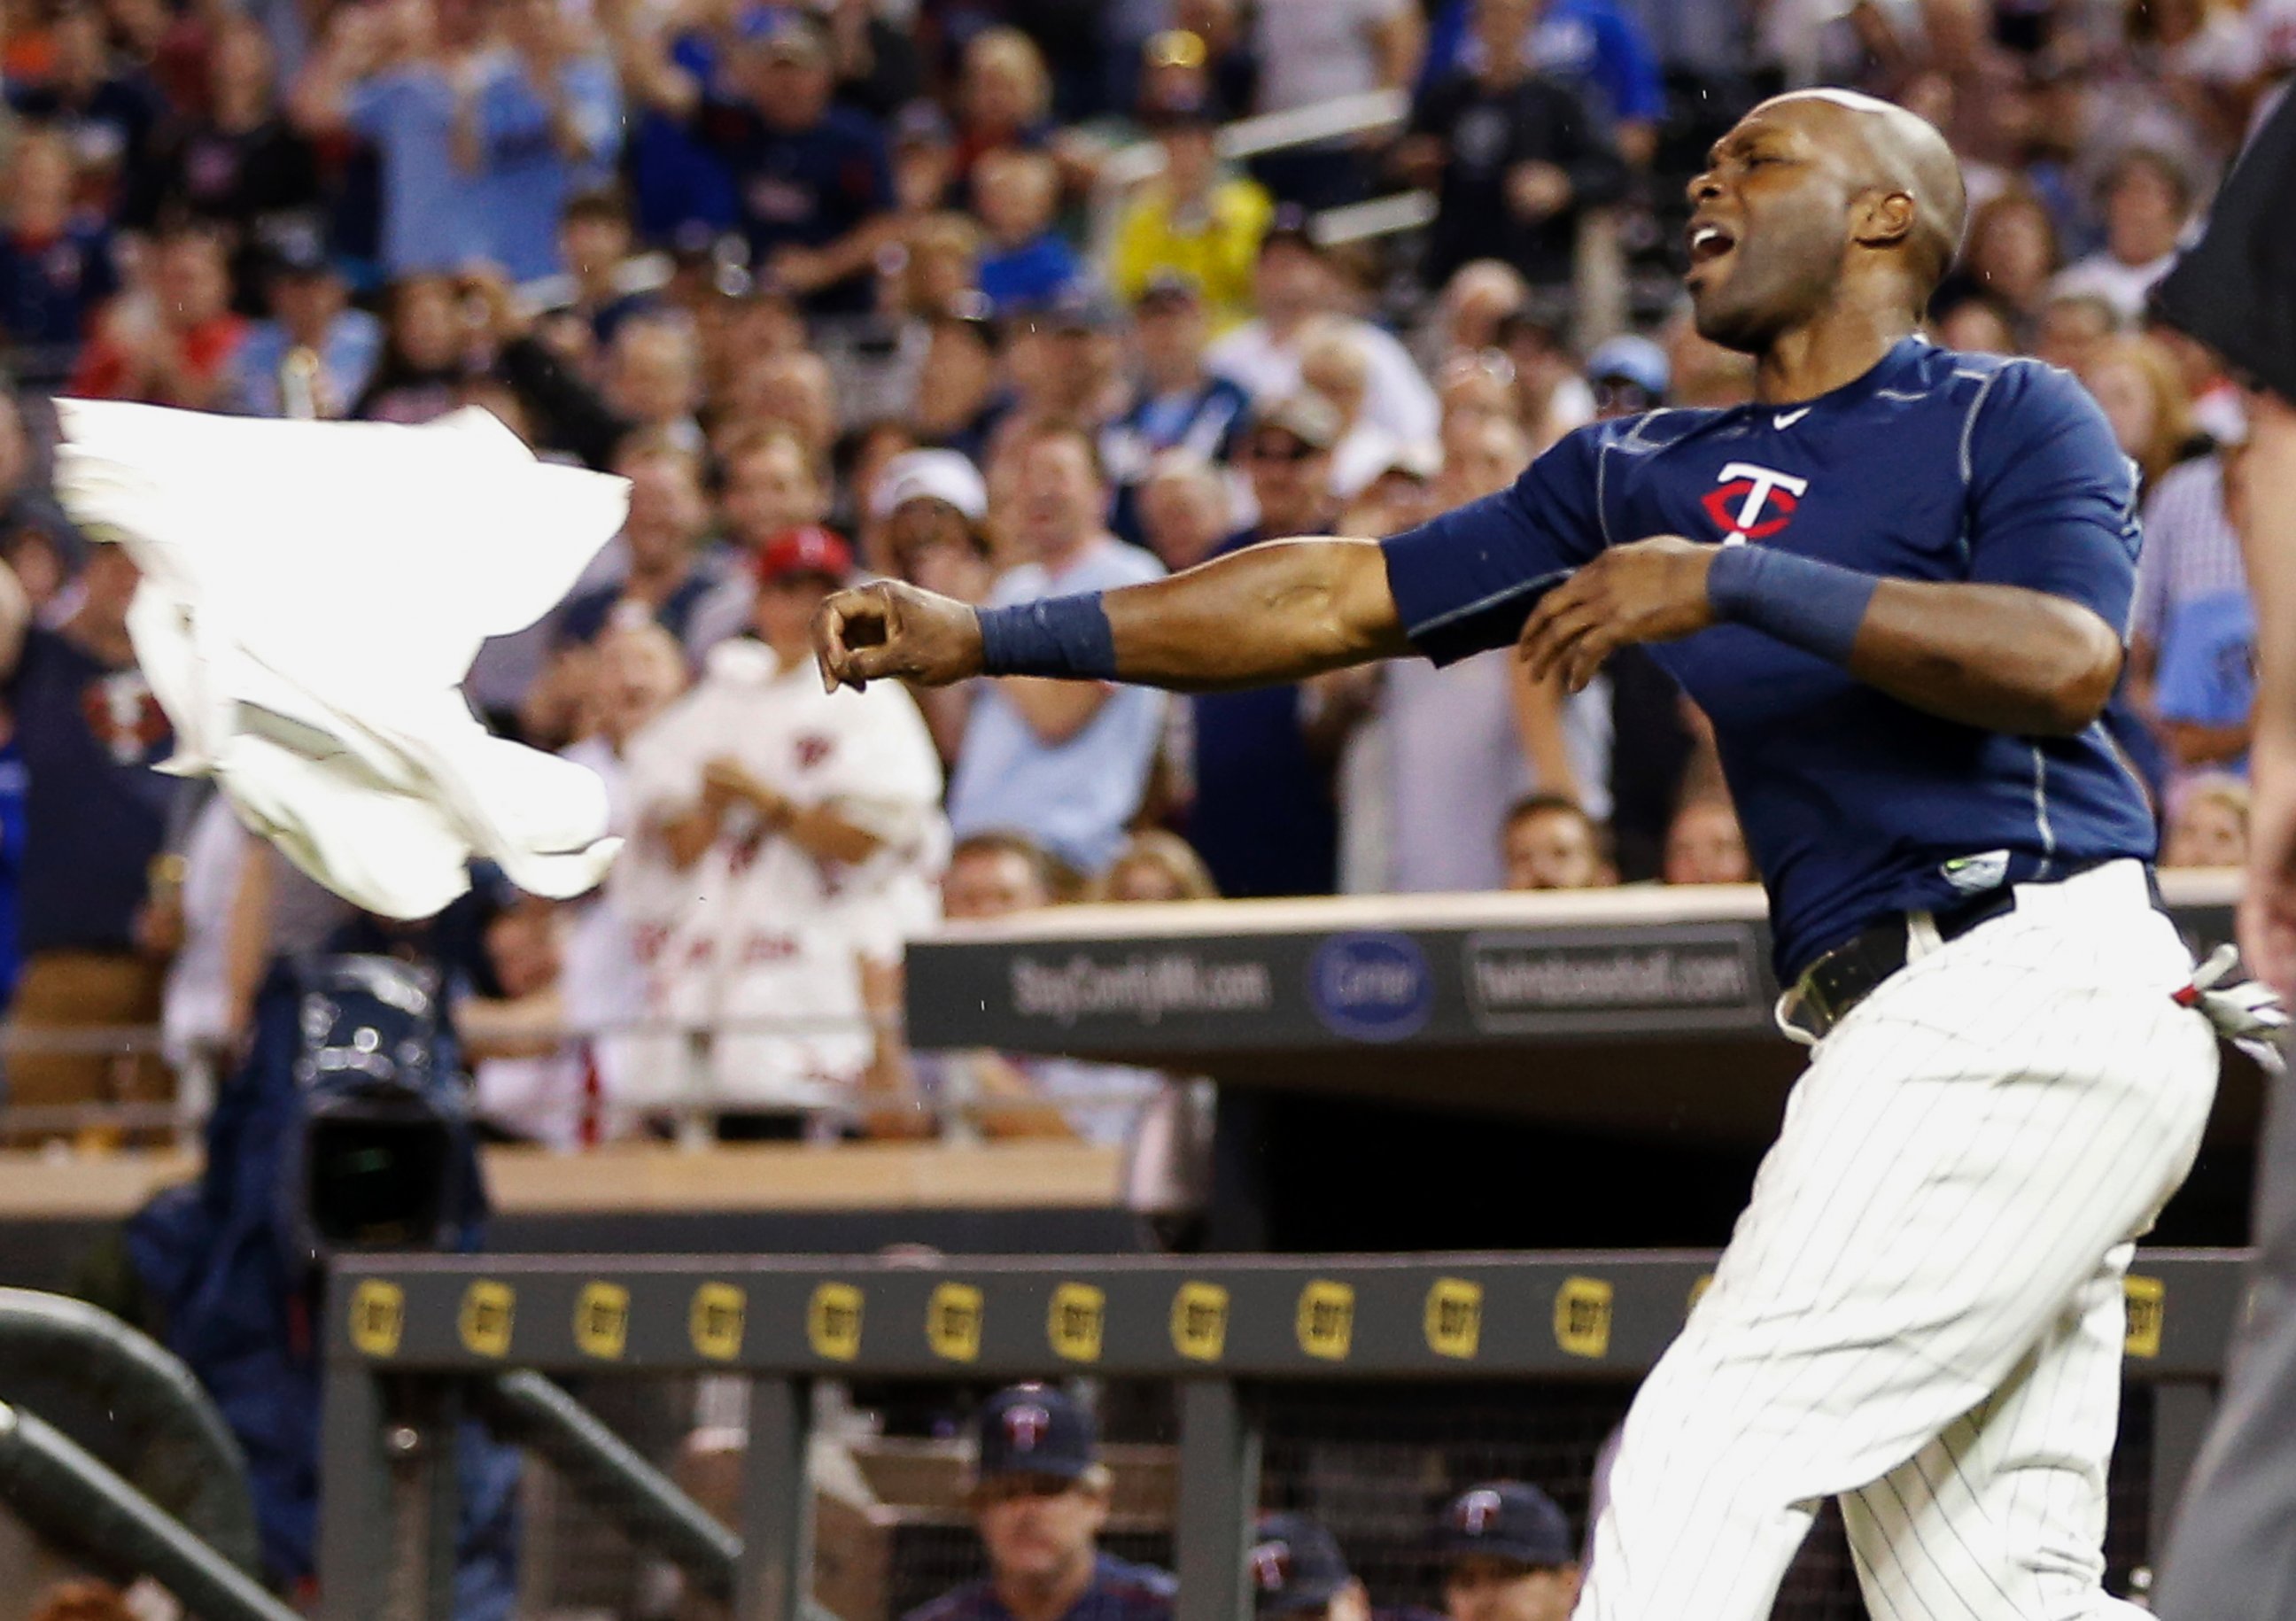 PHOTO: Minnesota Twins' Torii Hunter tosses his jersey following his ejection after he was called out on strikes in the eighth inning of a baseball game against the Kansas City Royals on June 10, 2015 in Minneapolis.